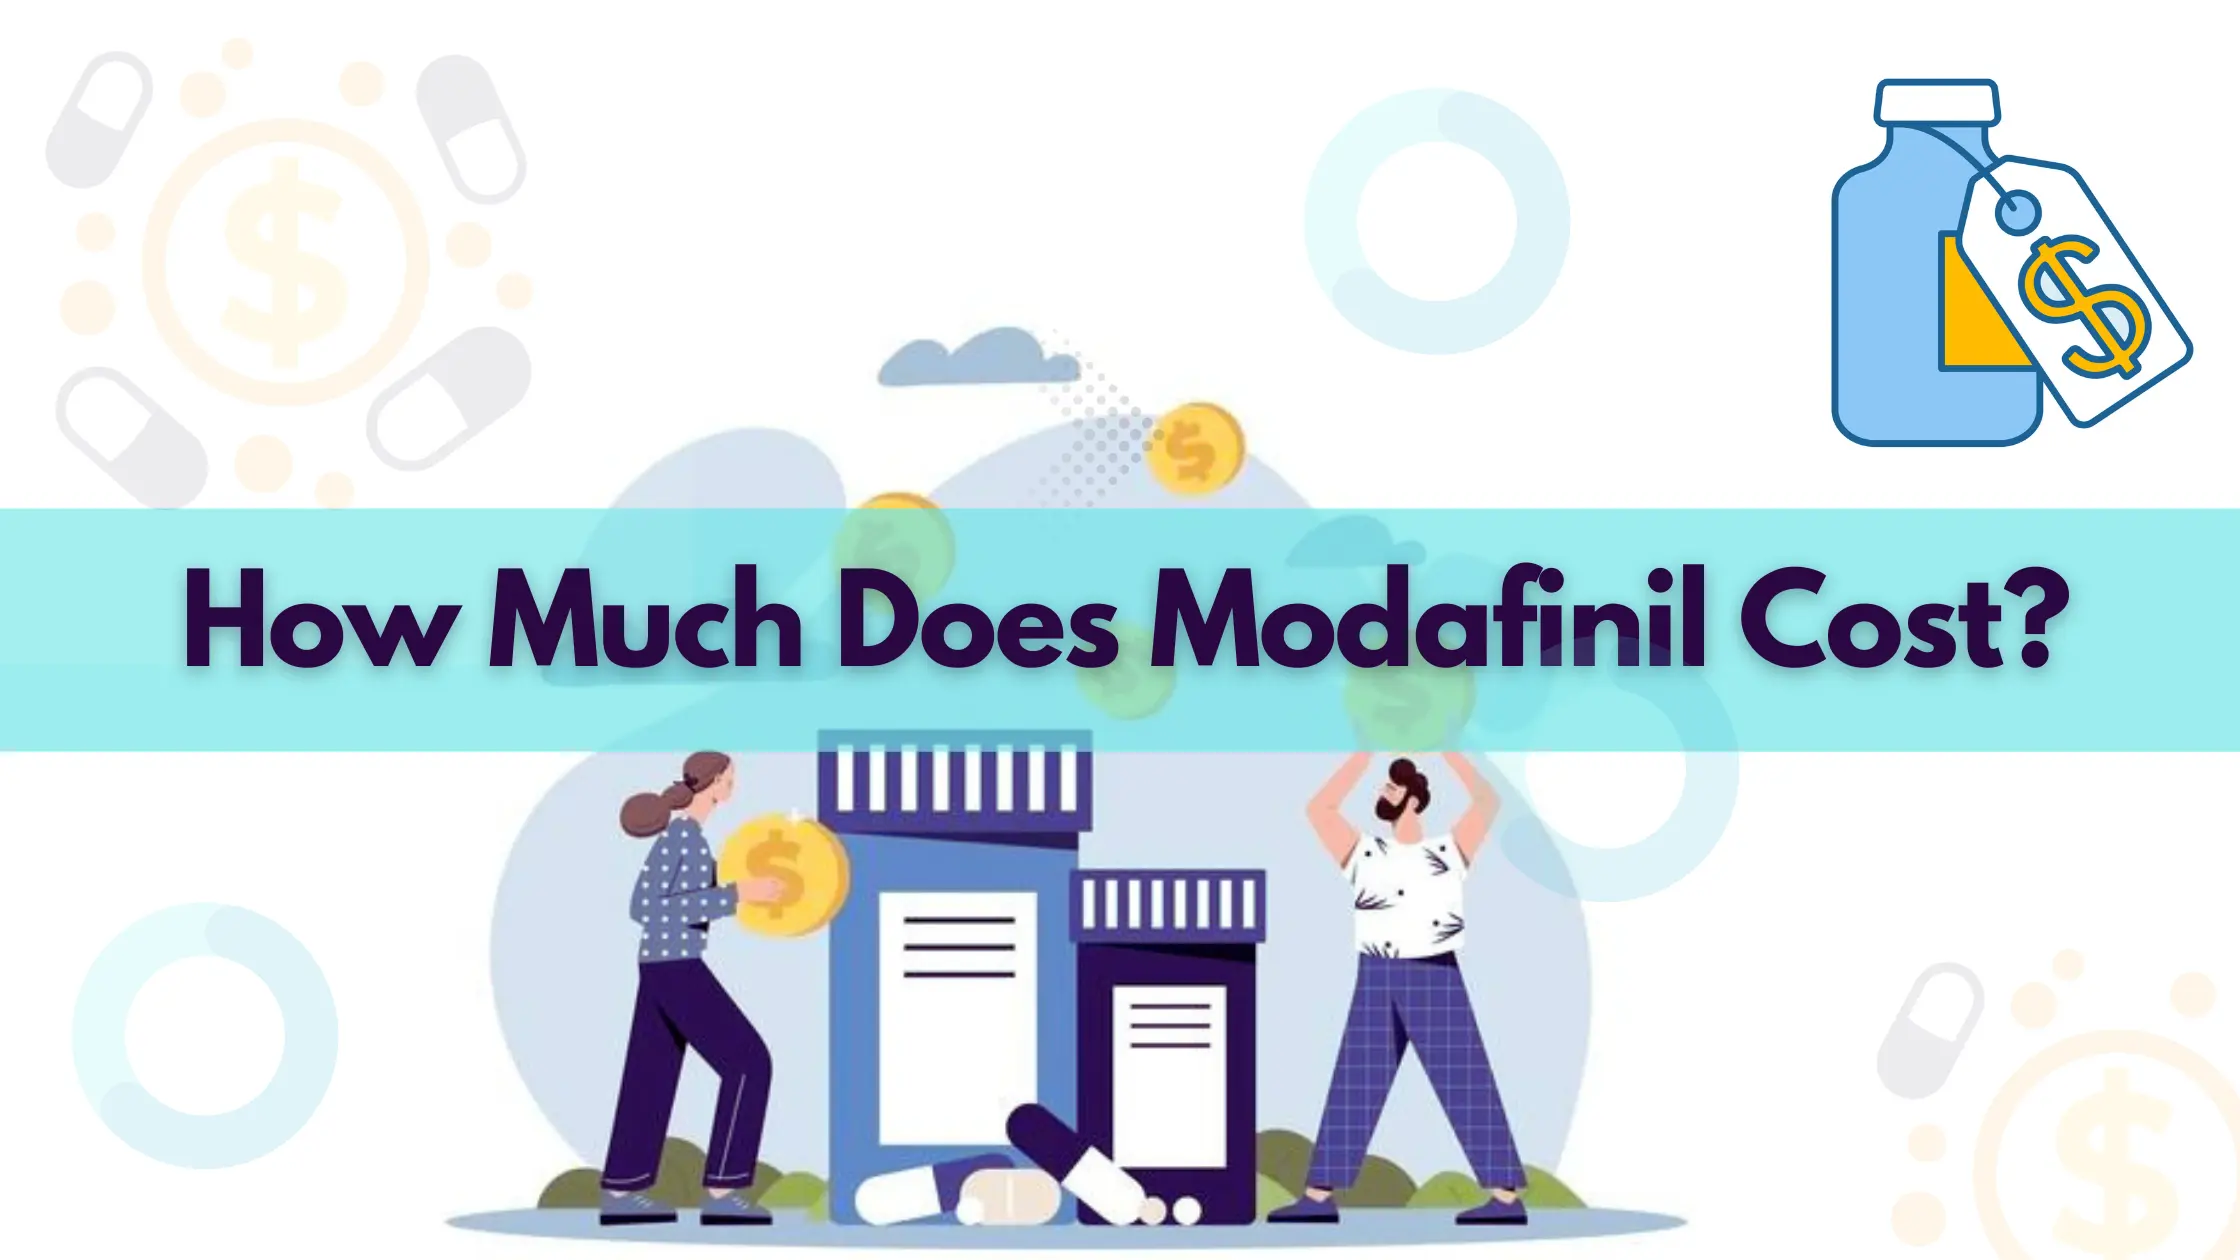 How Much Does Modafinil Cost?